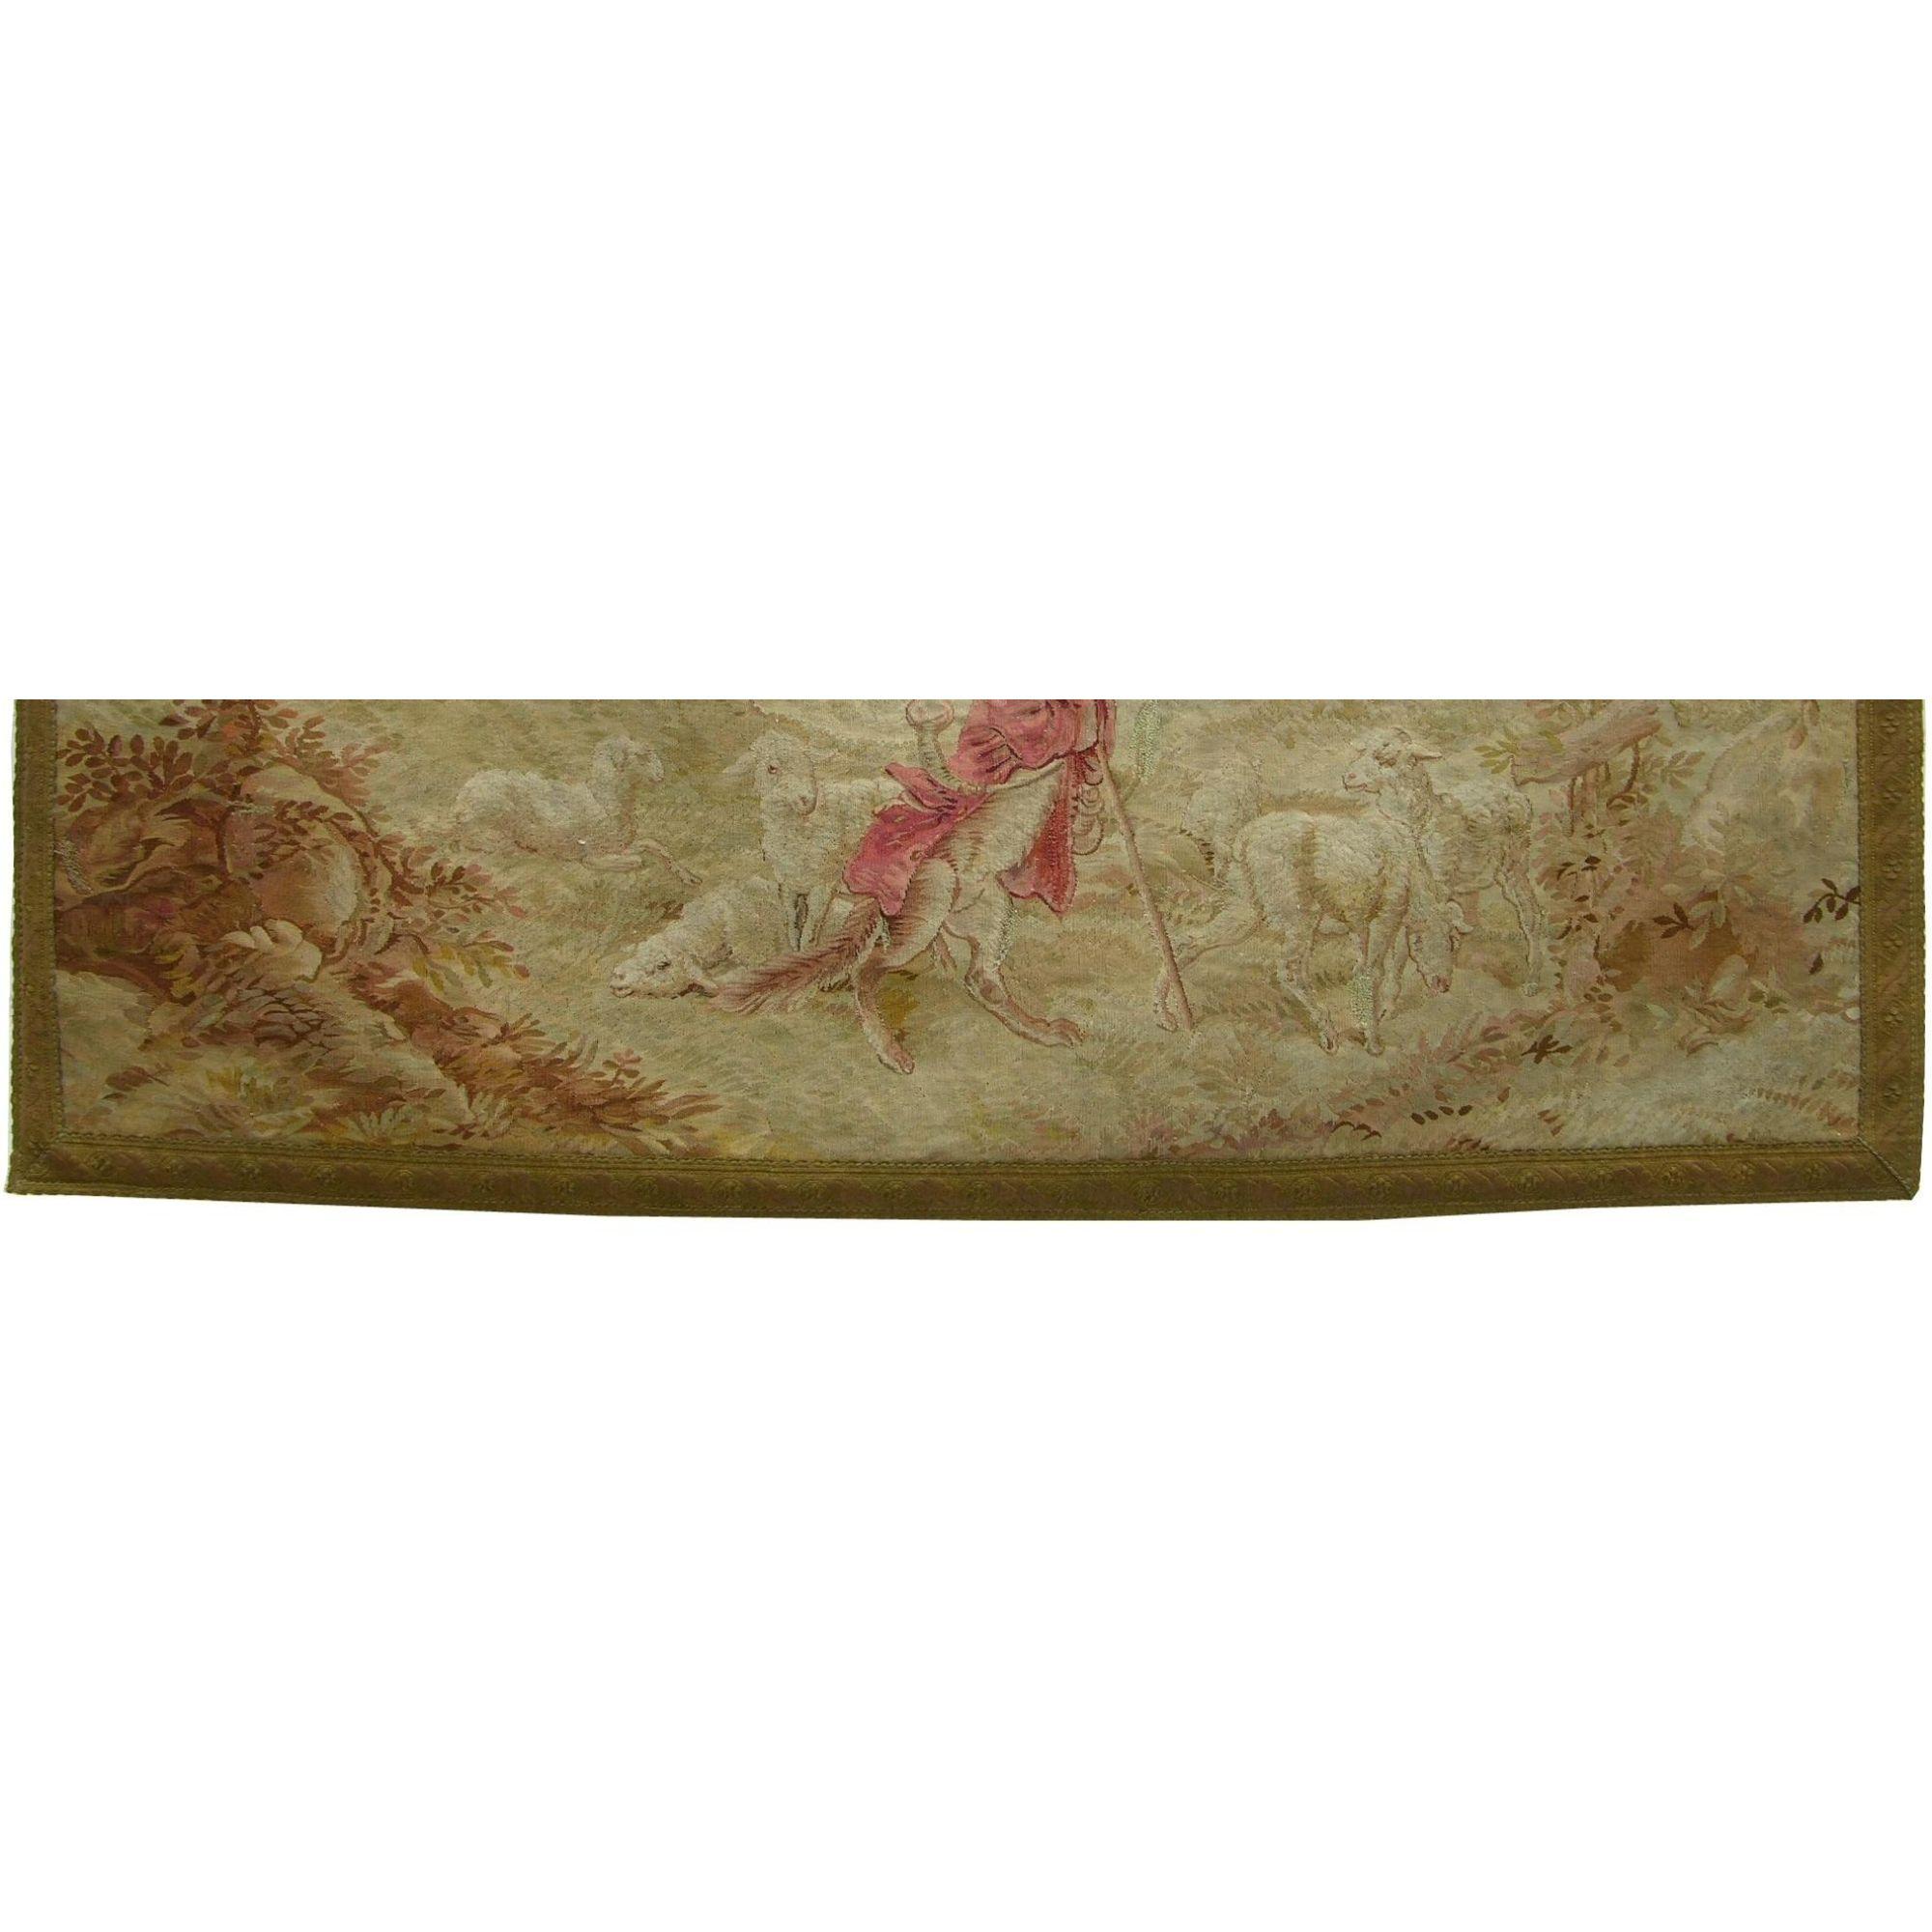 Unknown 1900 Antique French Aubusson Tapestry 1'11